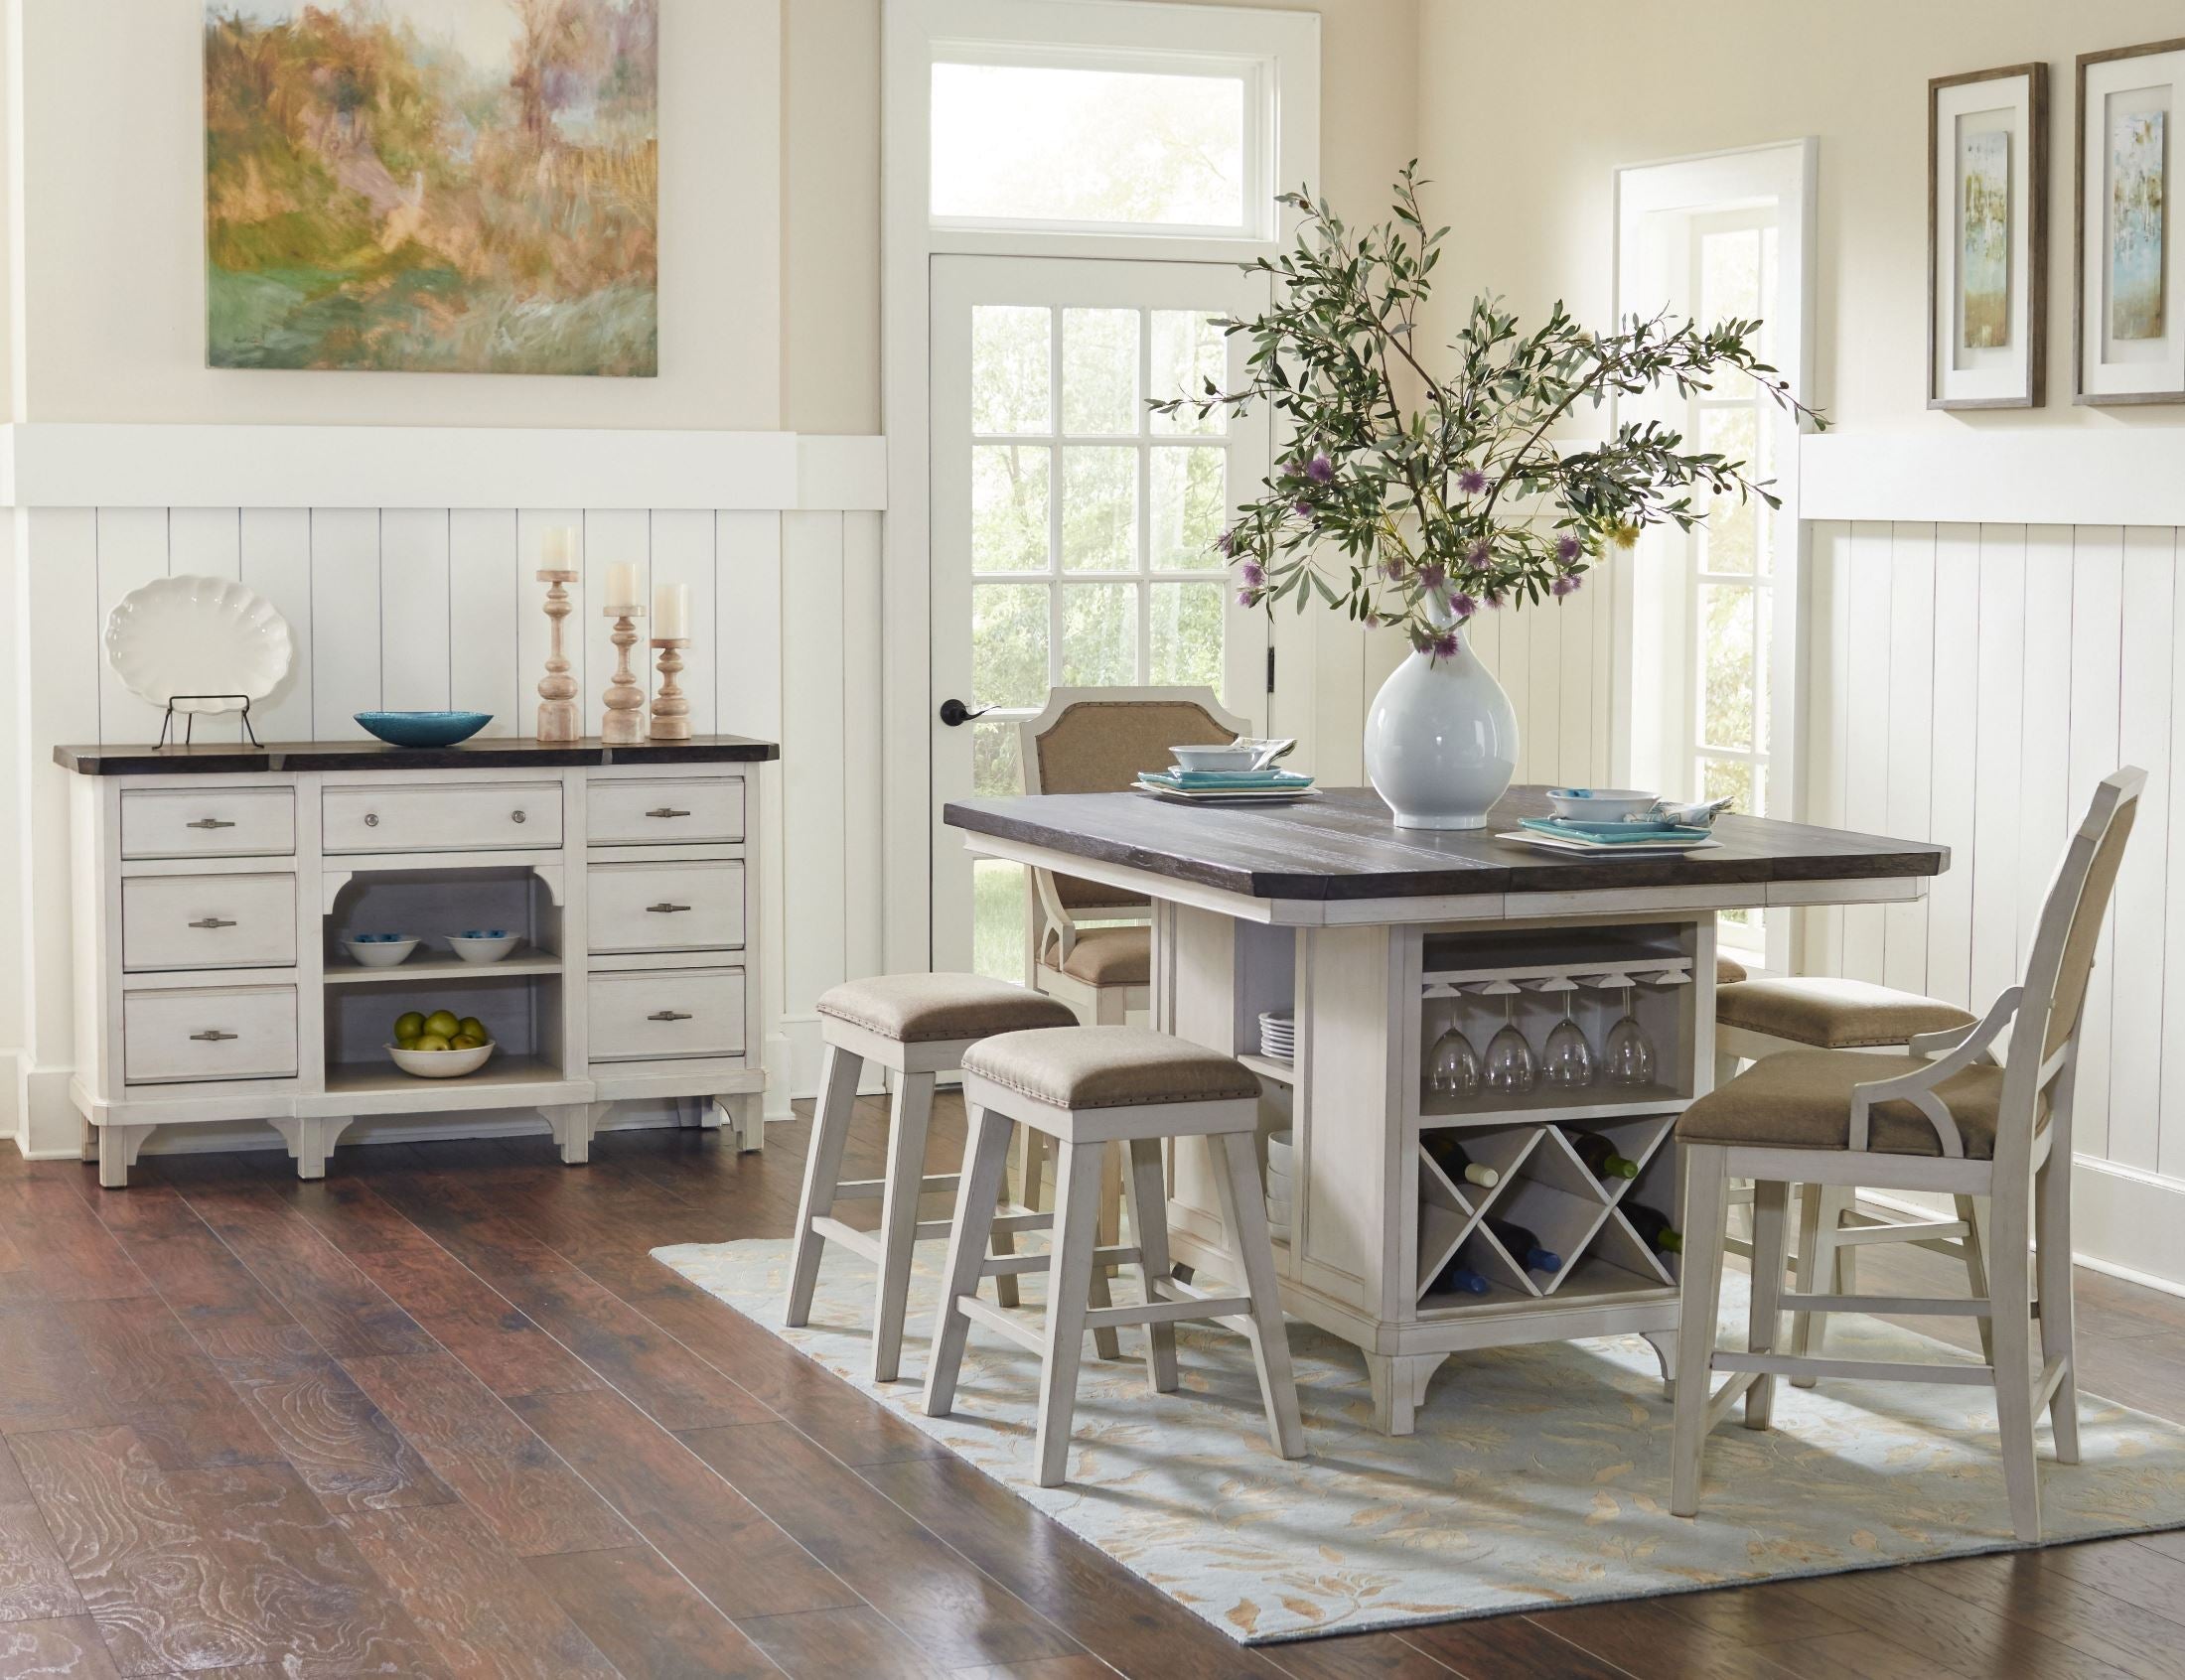 Extendable Kitchen Island Table with Chairs and Stools By: Alabama Beds